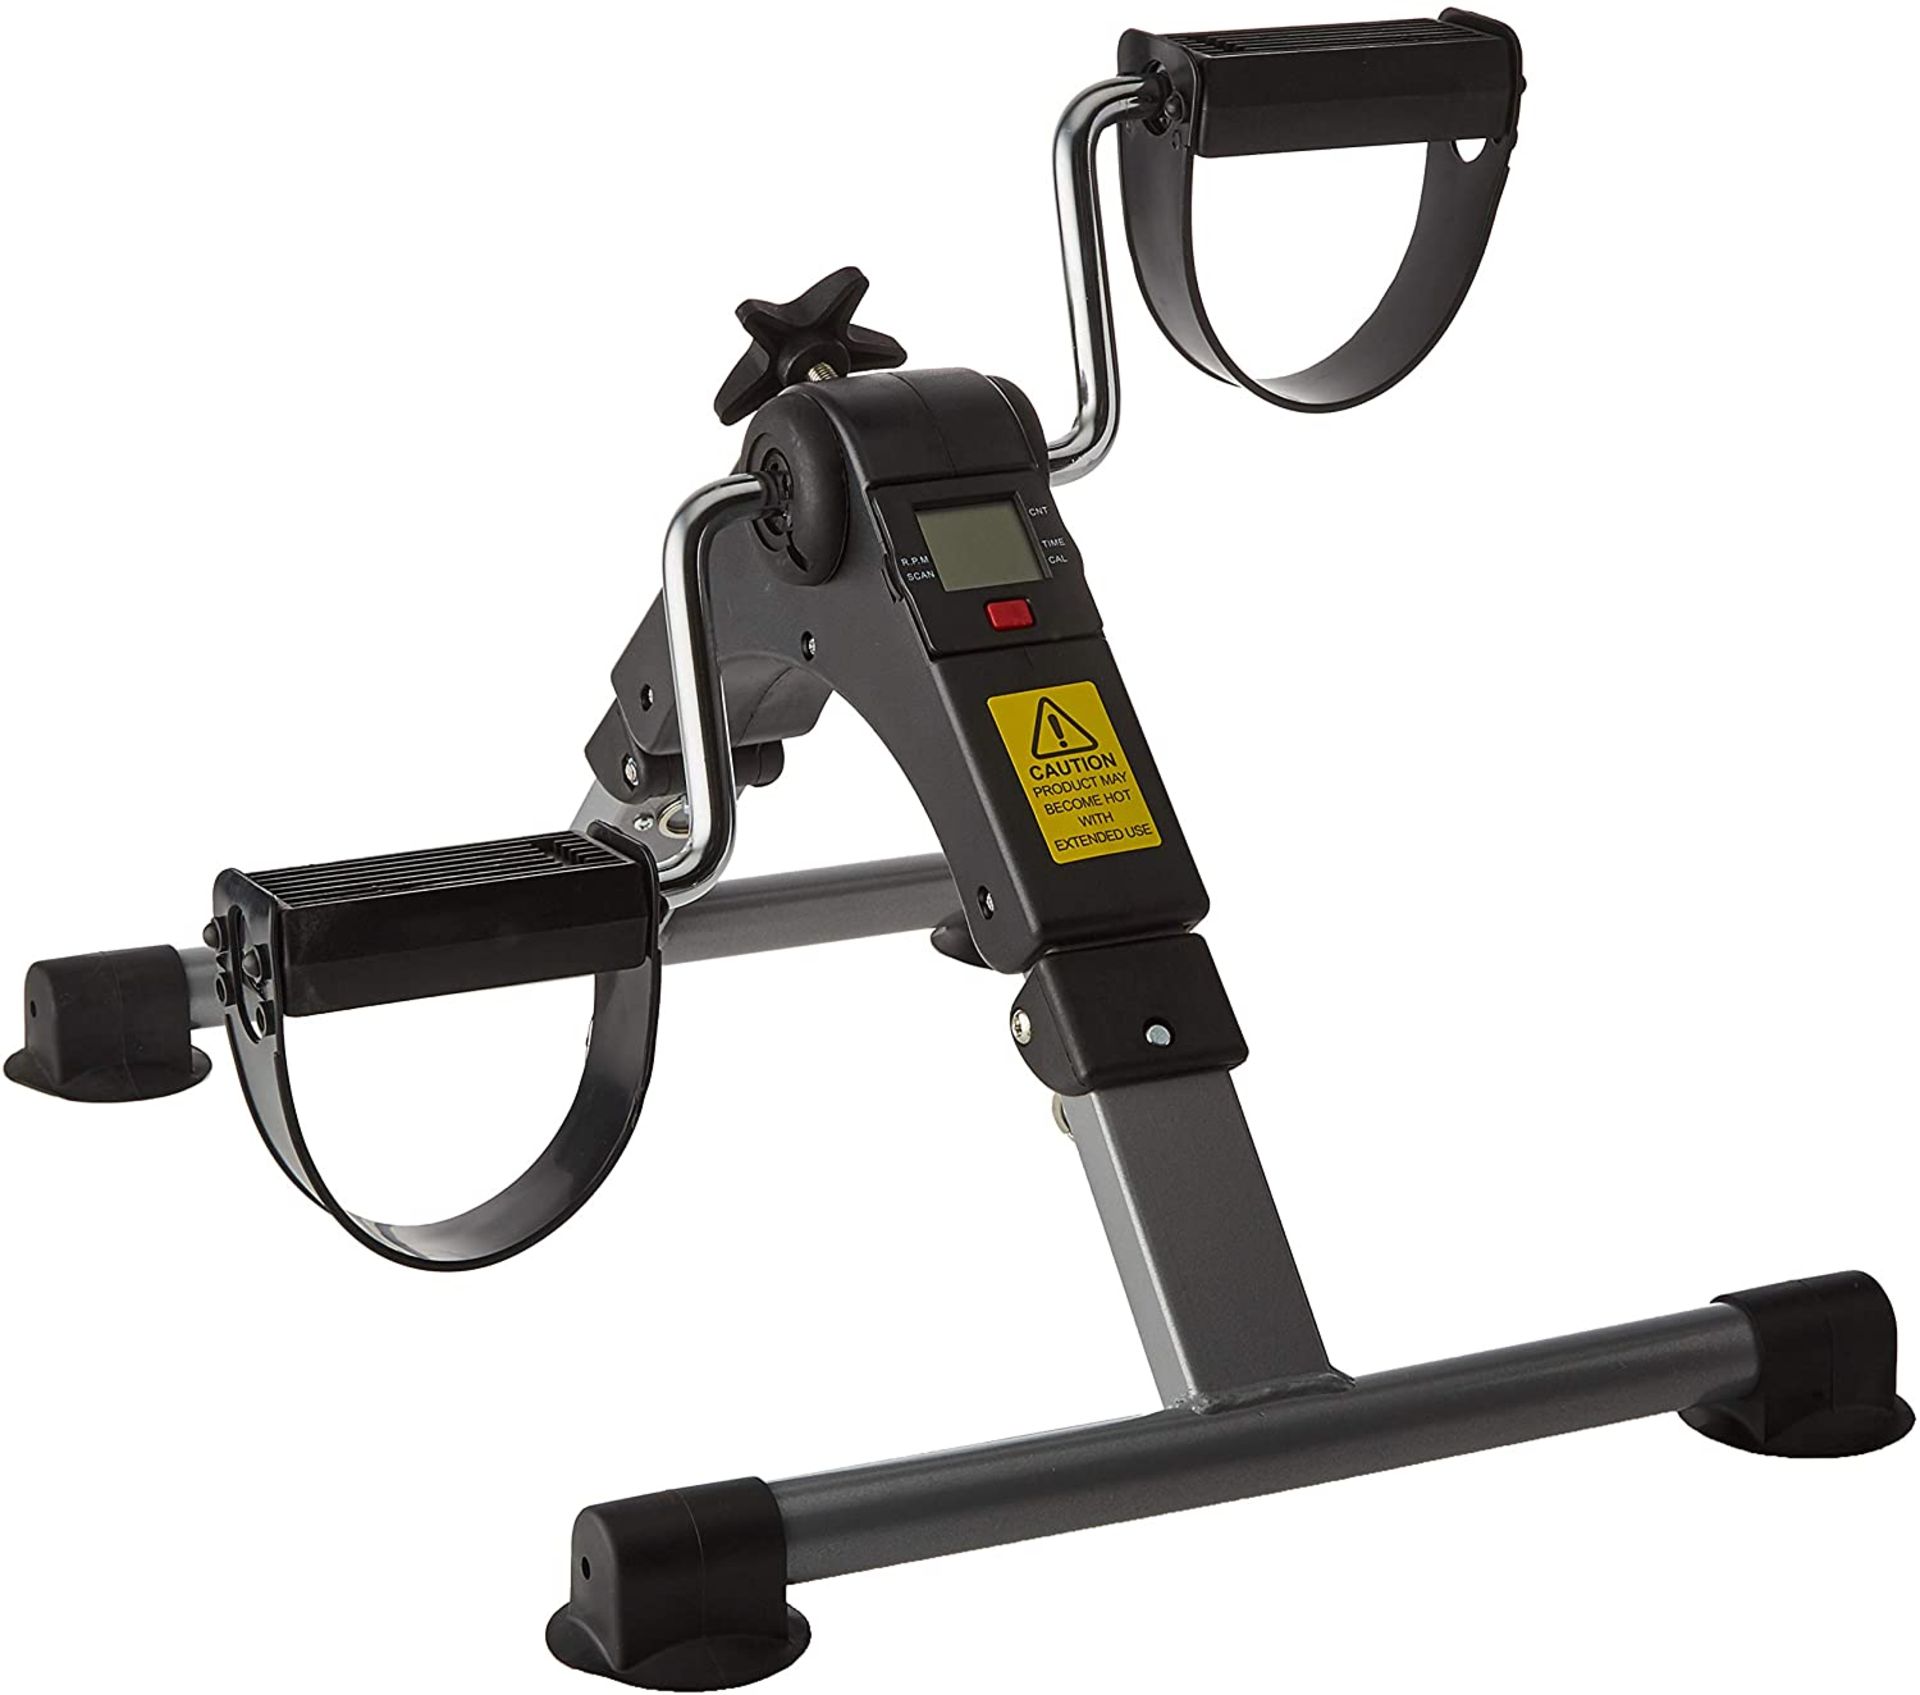 RRP £34 NRS Healthcare Pedal Exerciser with Digital Display, for Rehabilitation Exercise